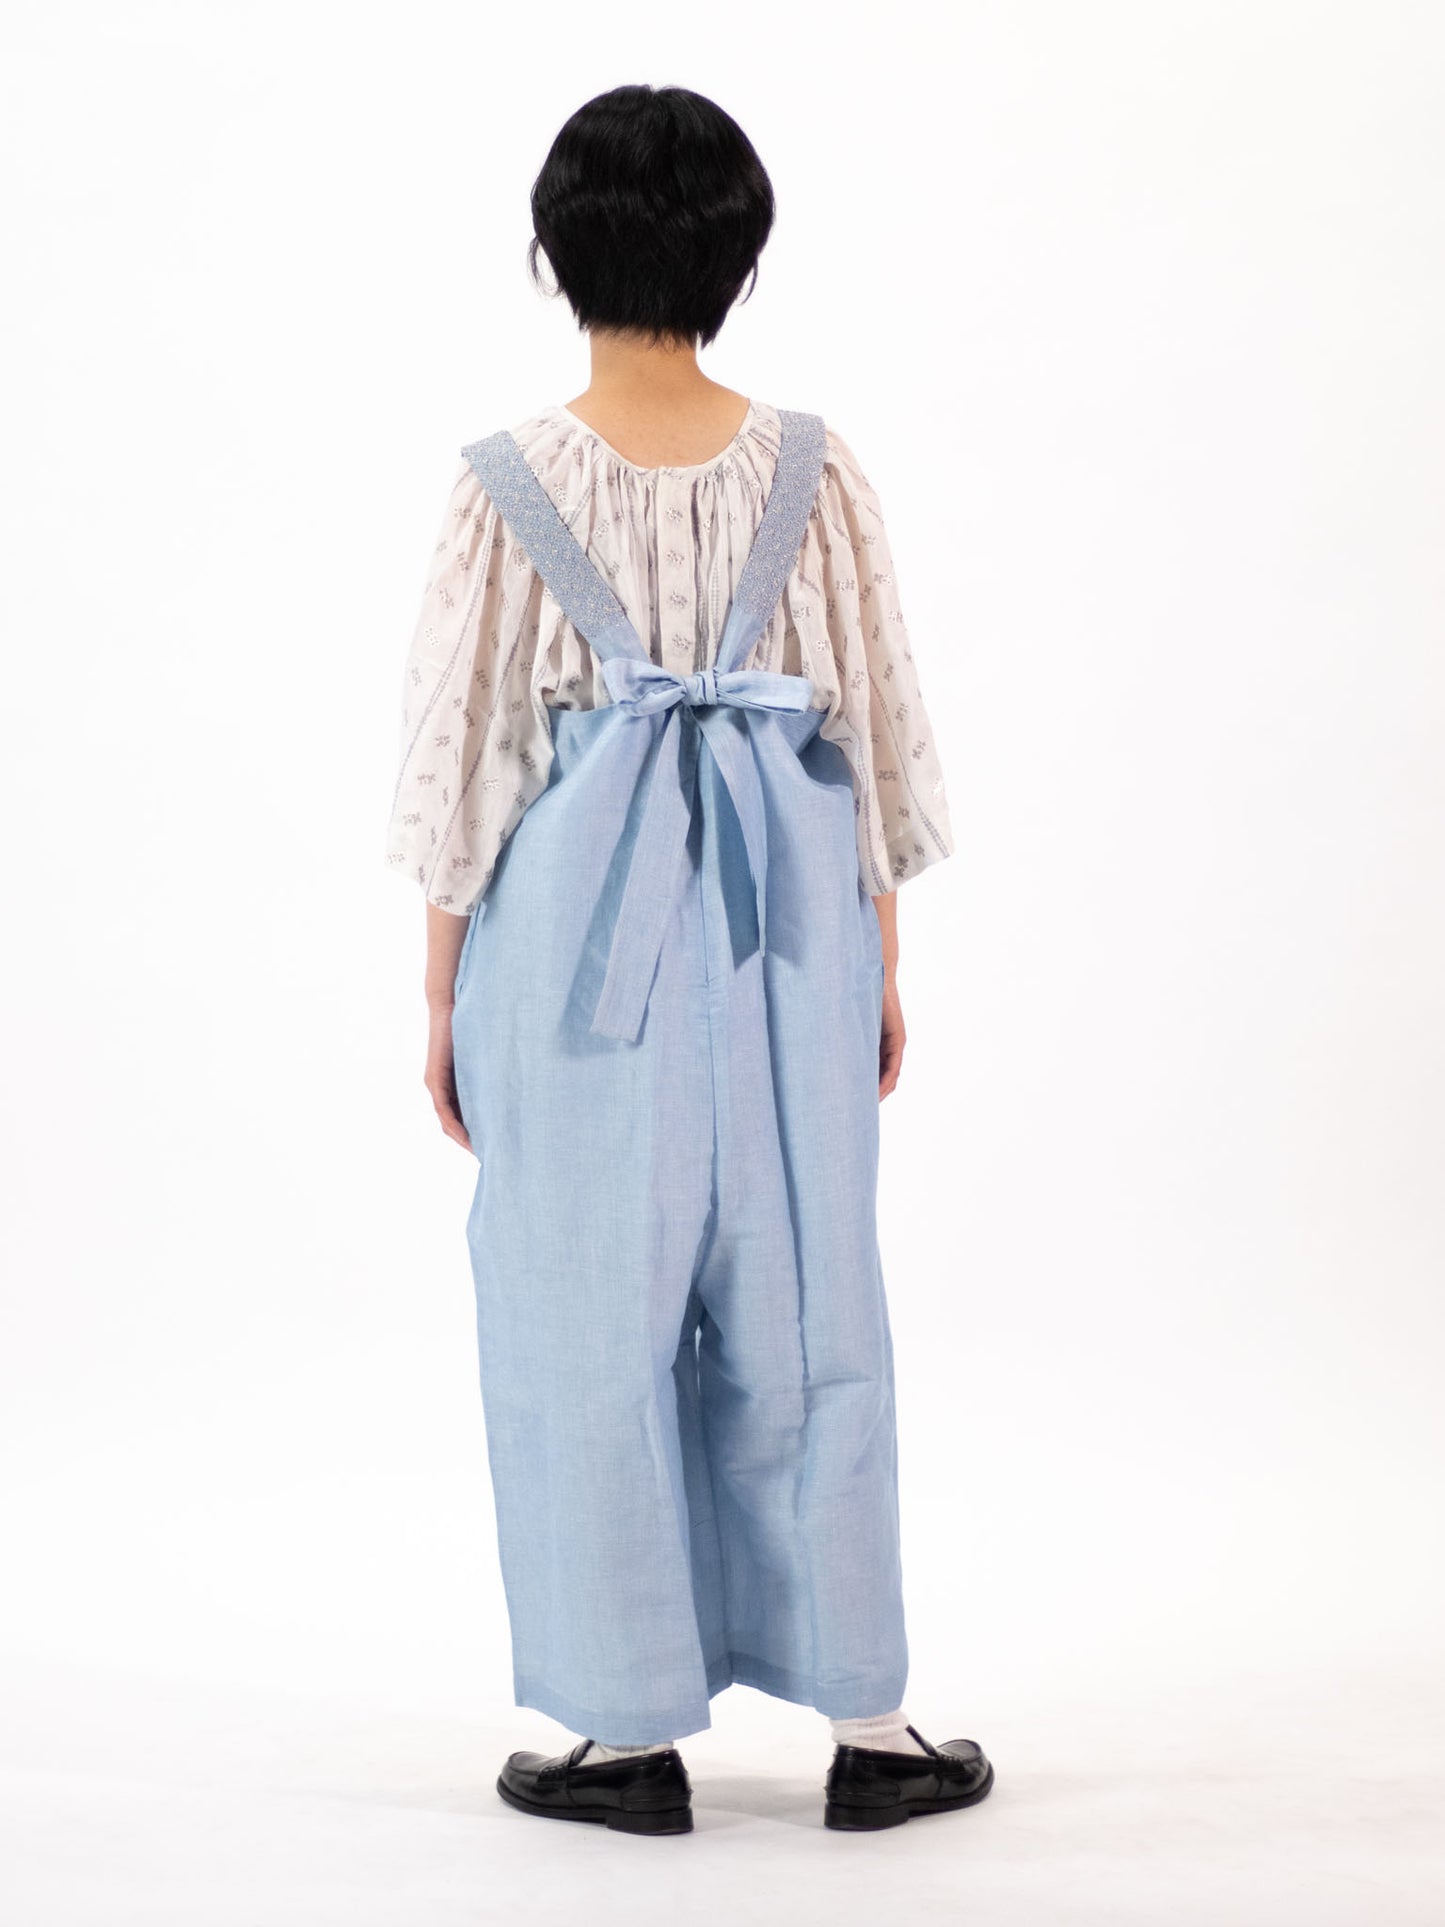 [50% off] Bunon Embroidery Overall - Icy Blue